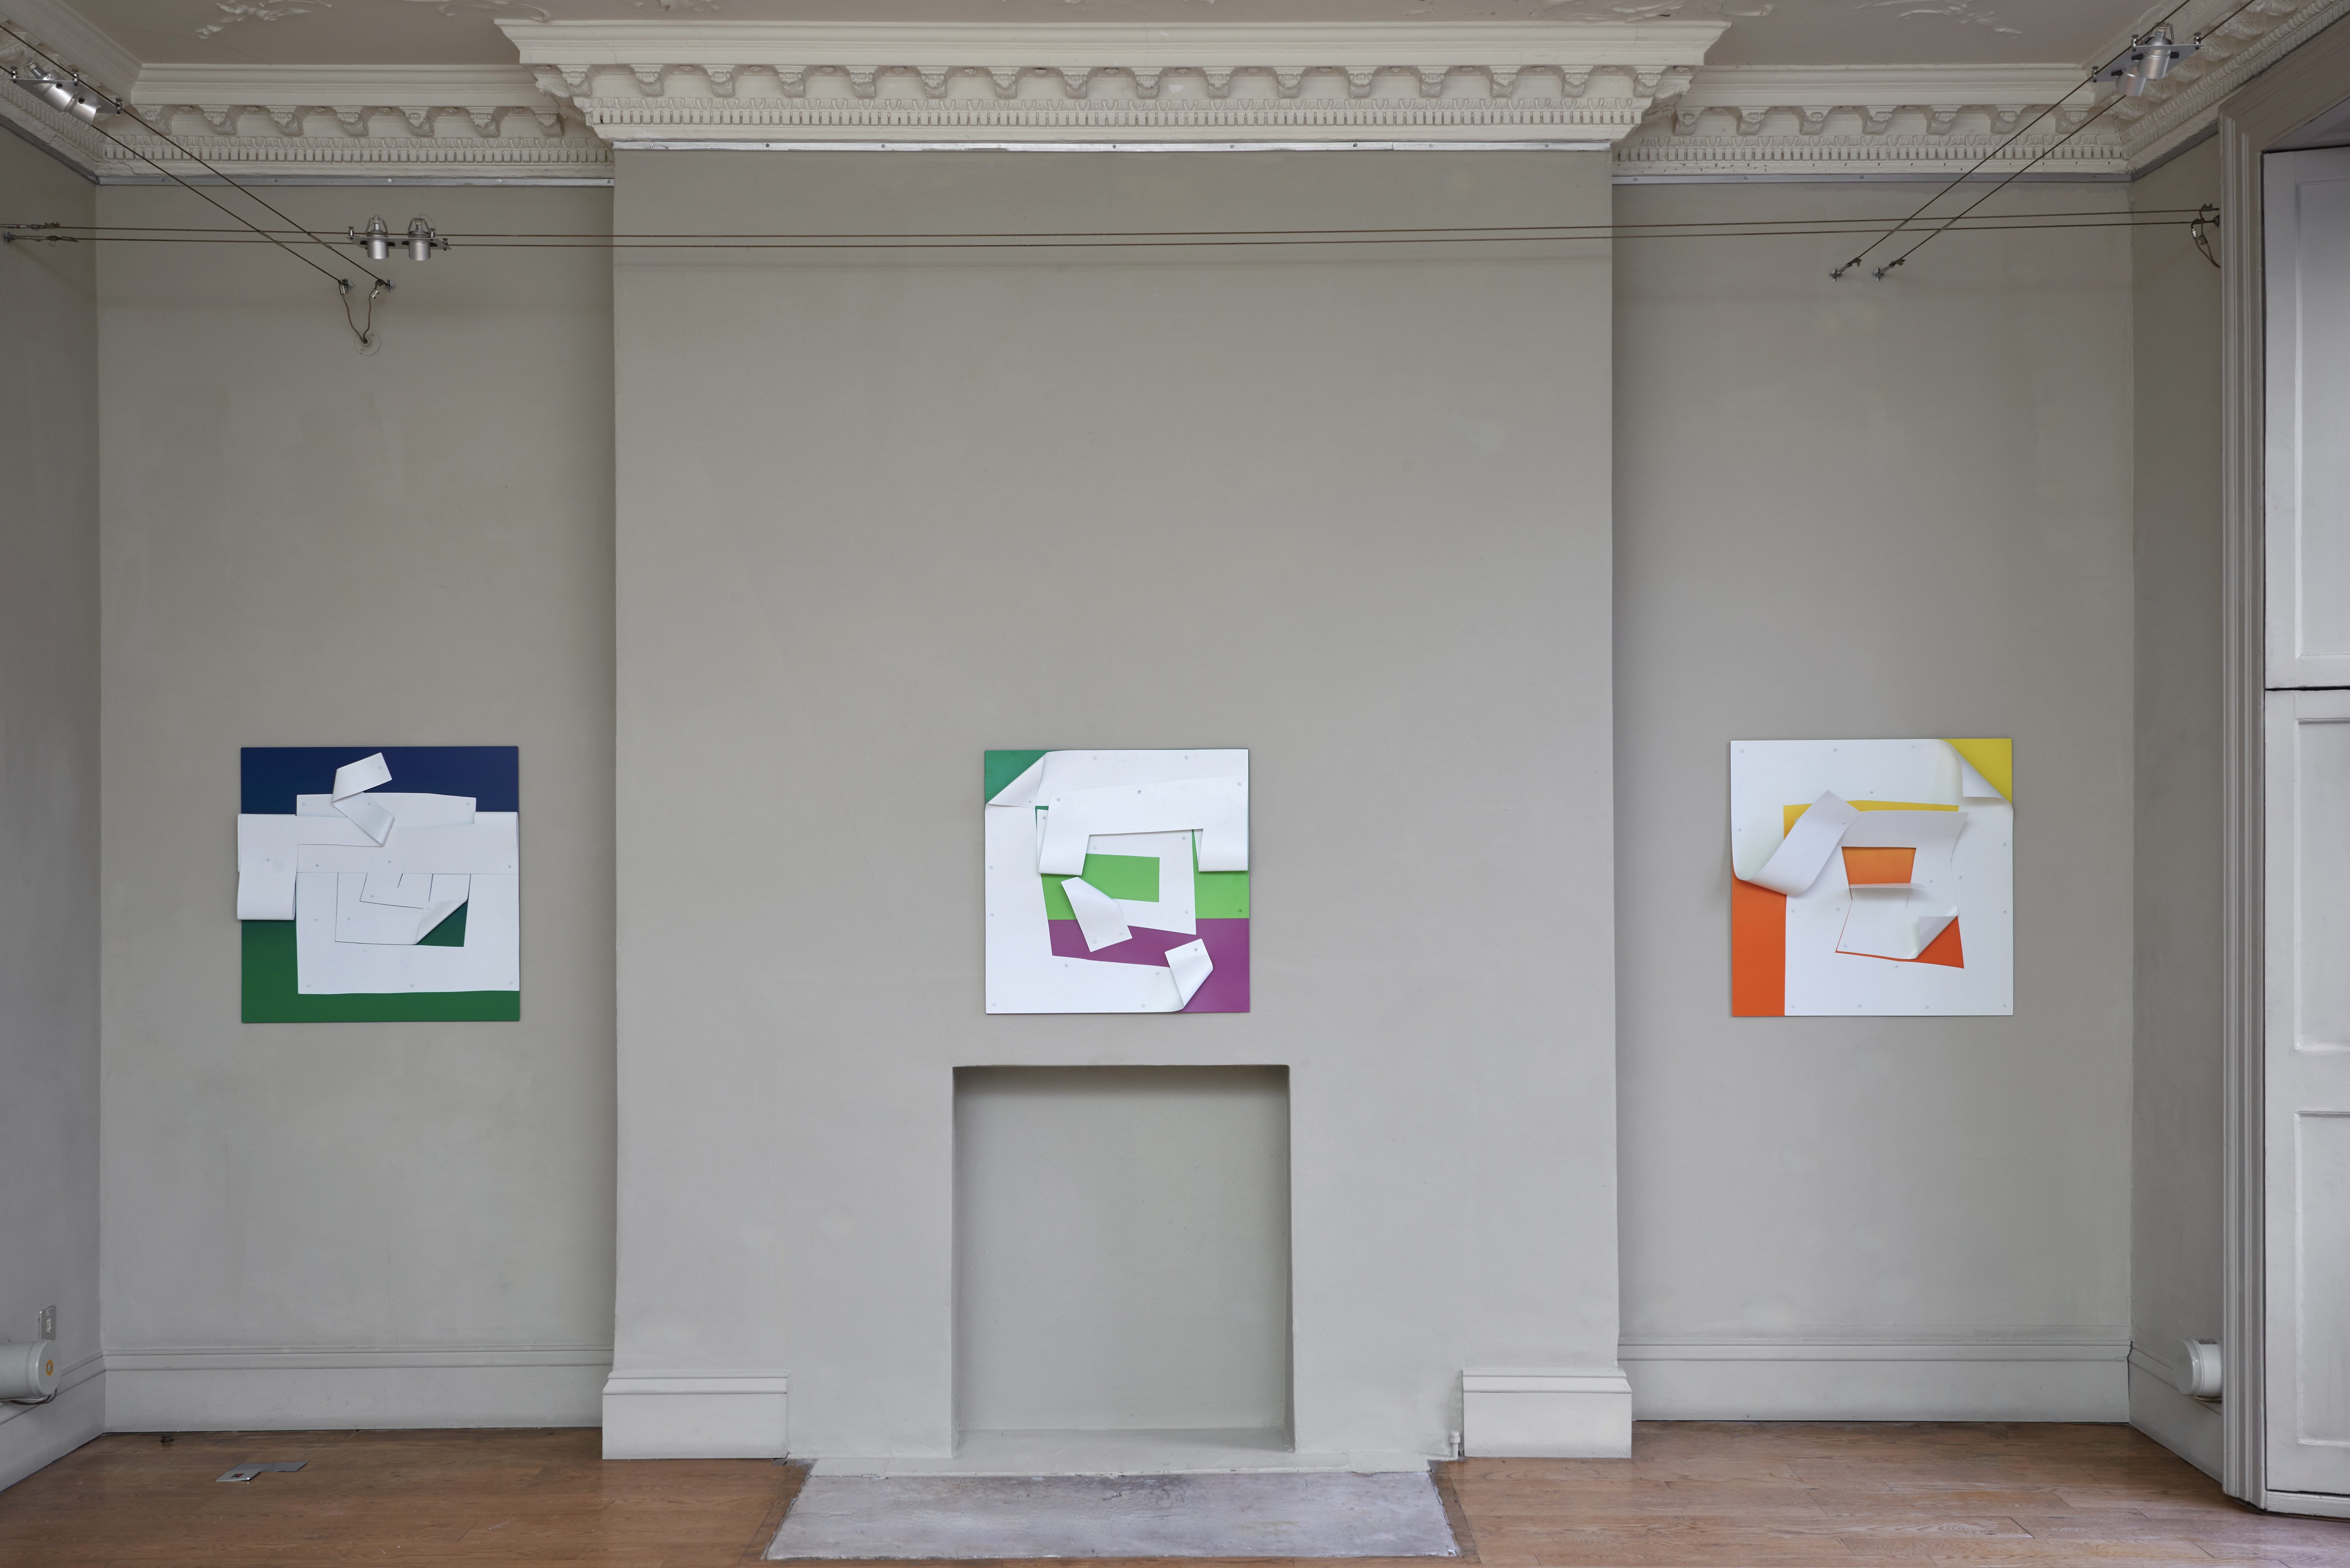 Neil Zakiewicz from left to right: 'Traversal 8' 75×75×4cm; 'Traversal 10' 68×68×4cm; 'Traversal 1' 75×75×12cm; all: spray paint on steel, 2022, installation photo by Andy Keate